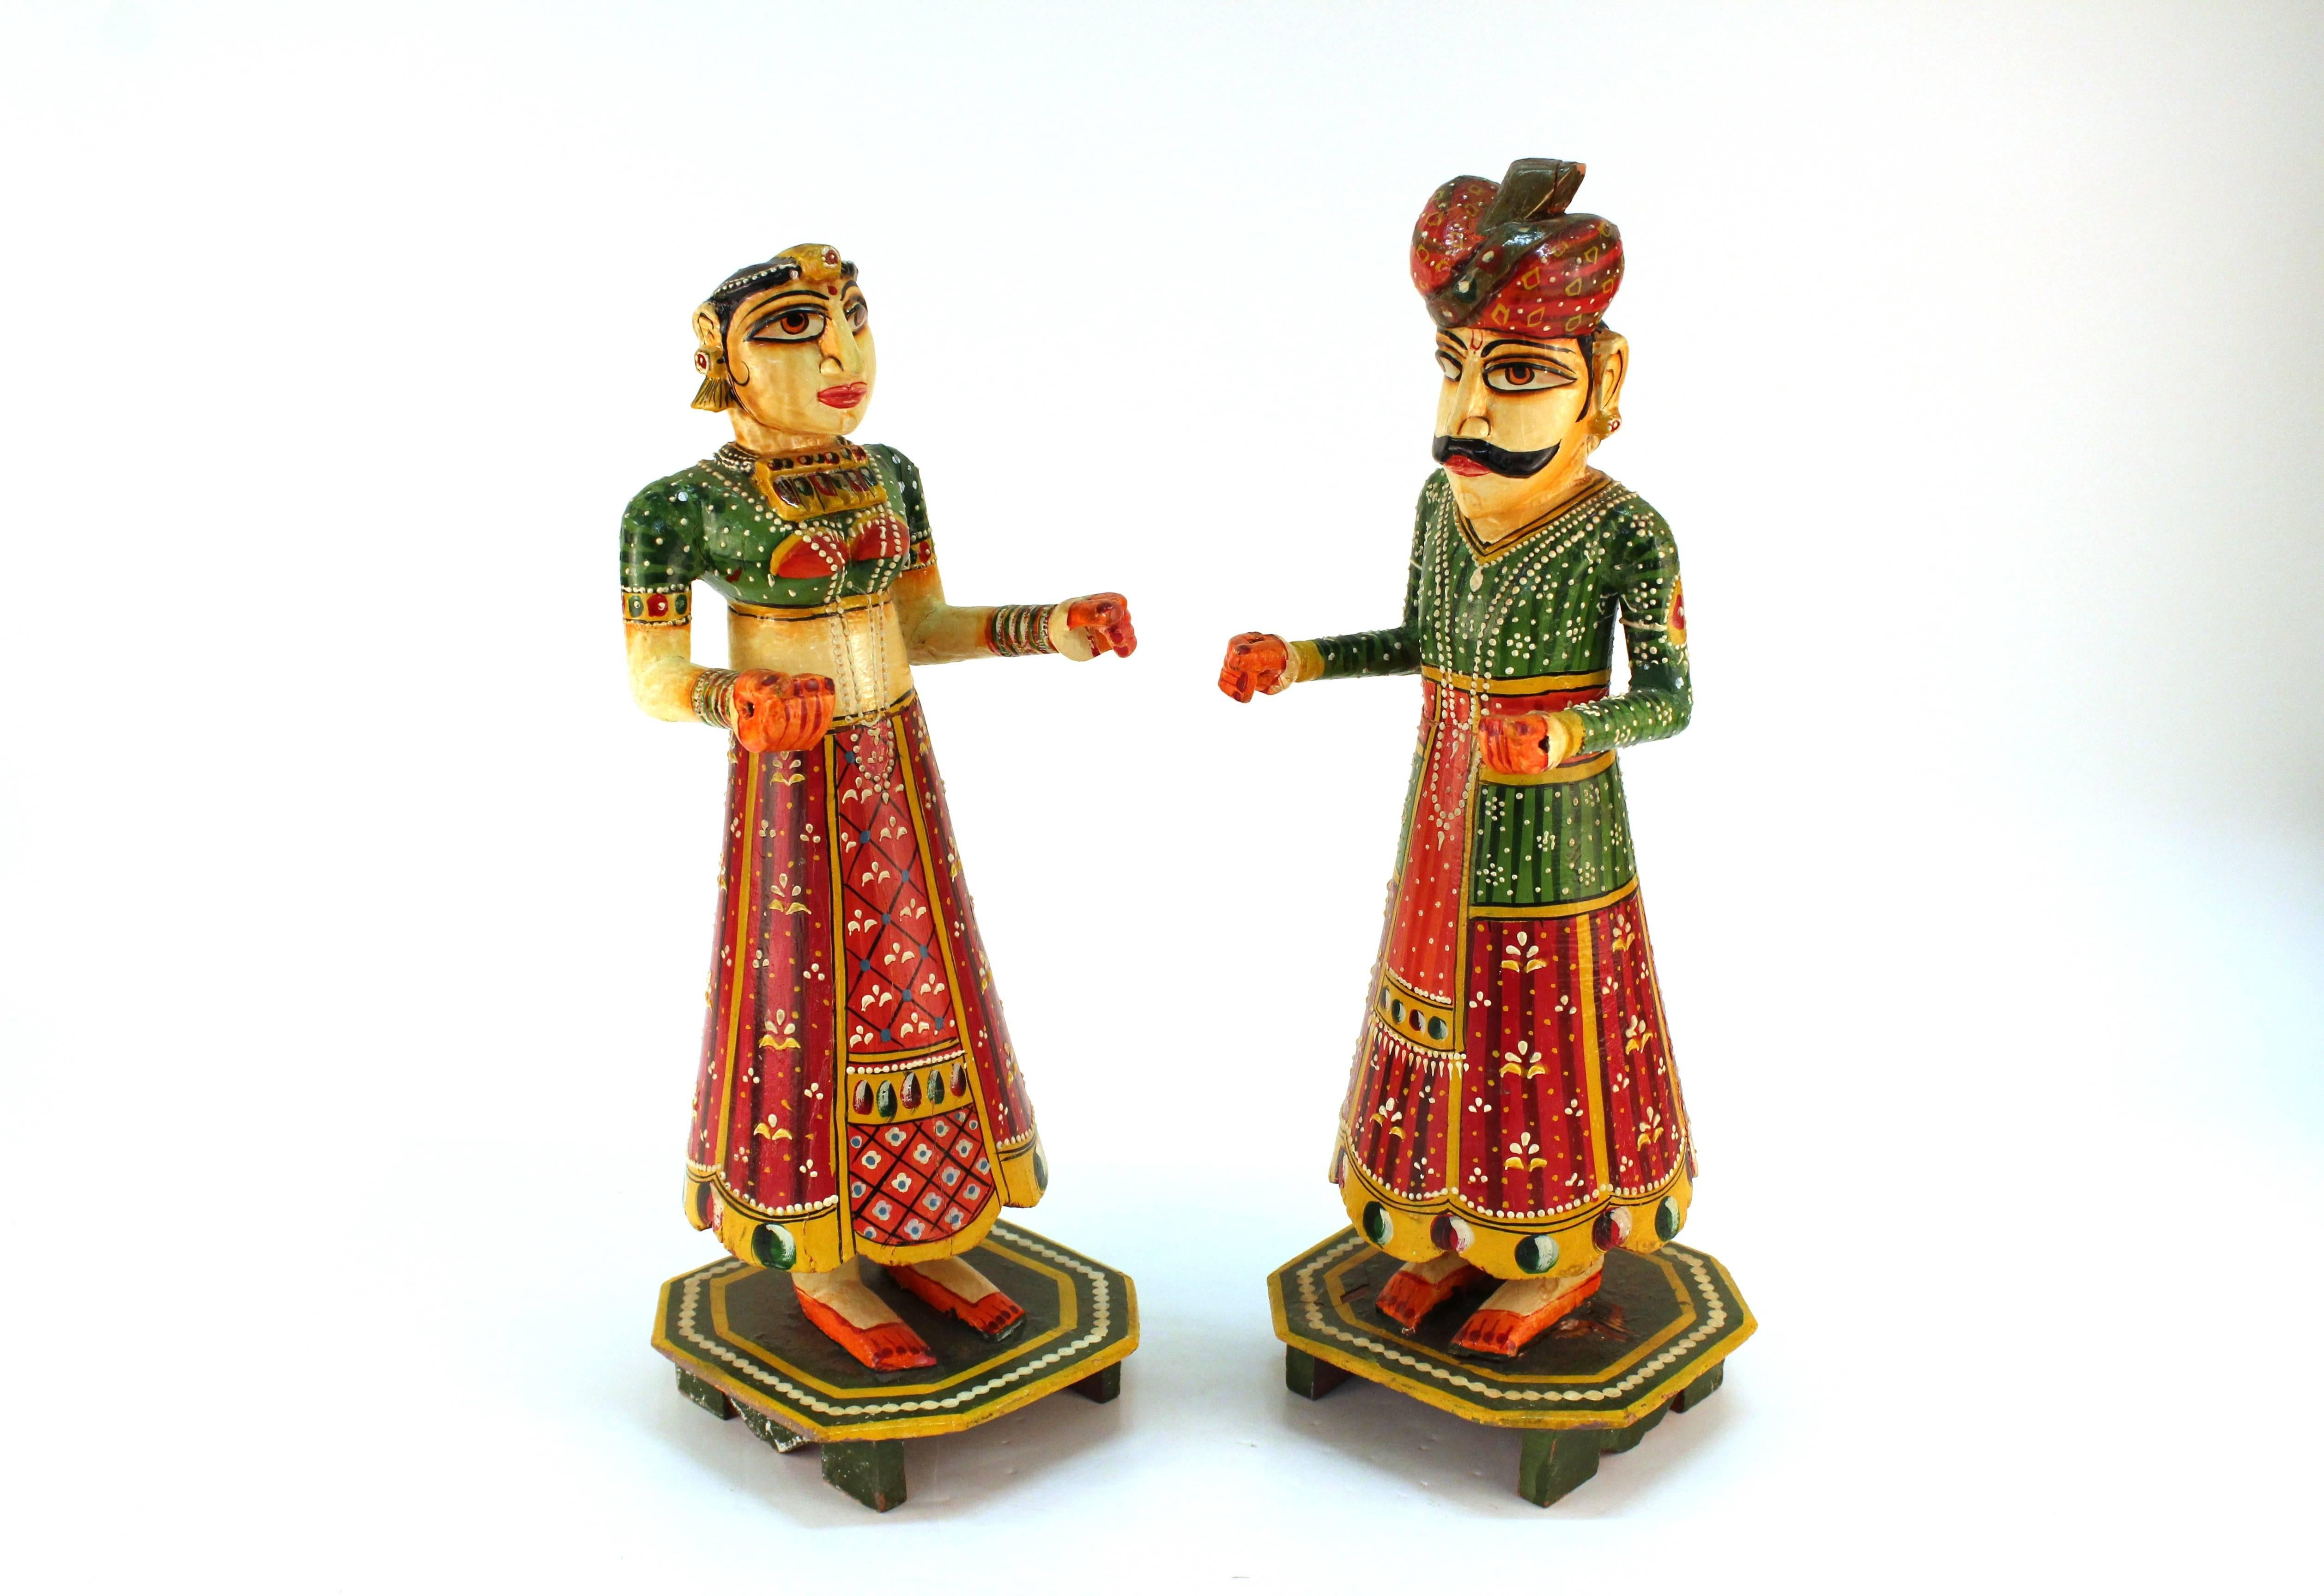 A pair of hand-painted Rajasthan dolls. Crafted for the celebration of Gangaur. The dolls depict Gauri and Issar in wedding attire. Each figure stands on an octagonal base. The figures are in good condition.